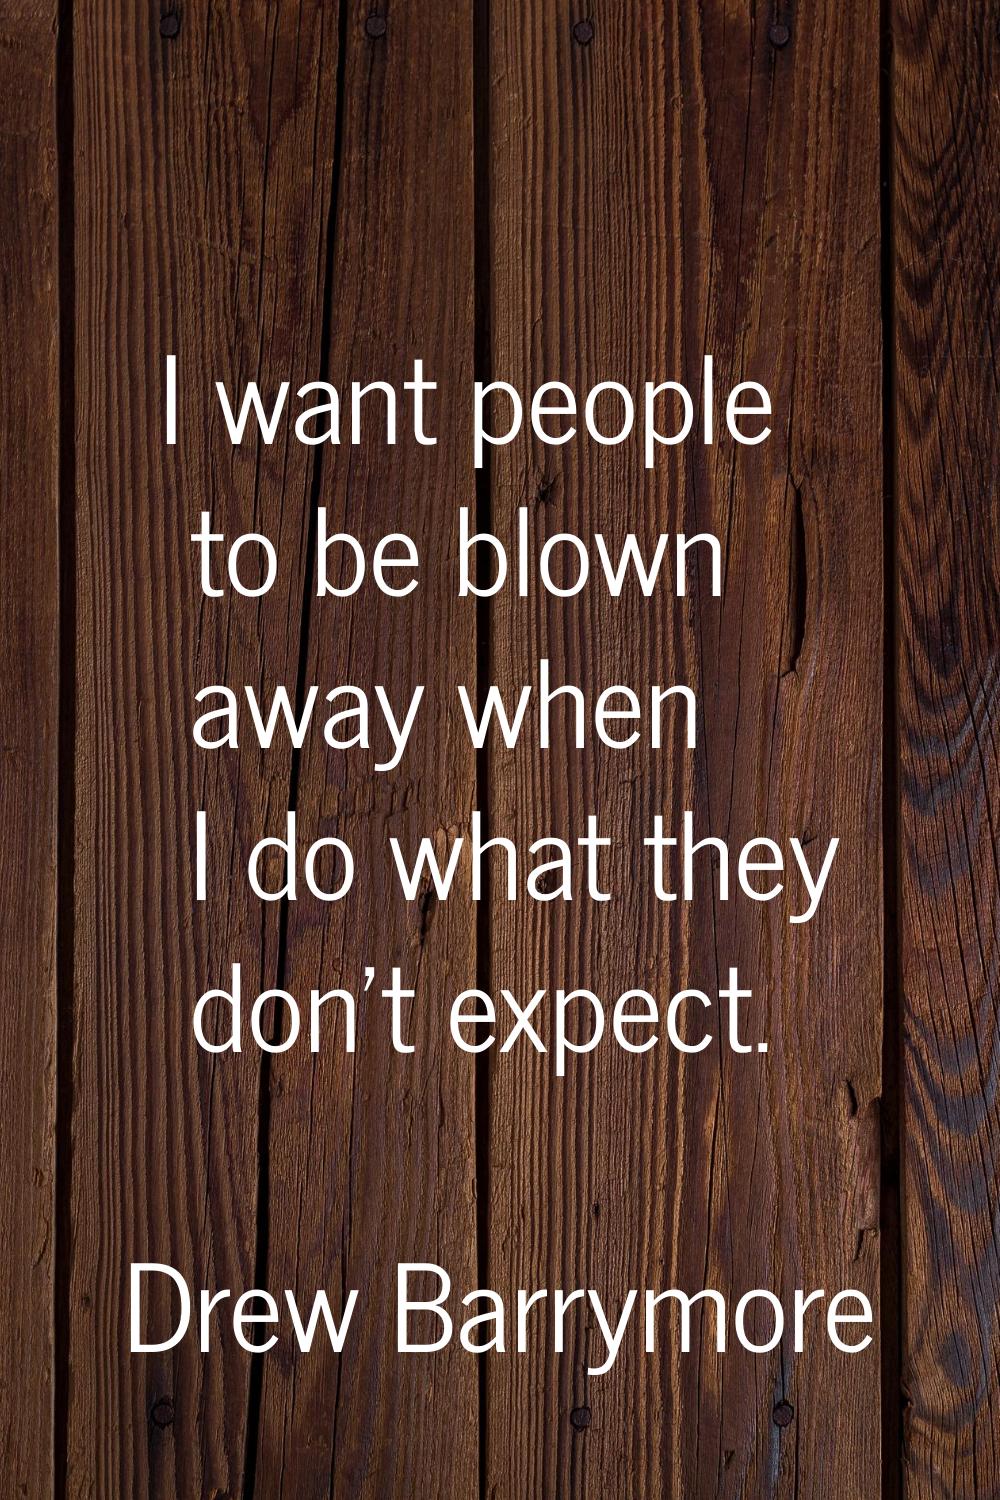 I want people to be blown away when I do what they don't expect.